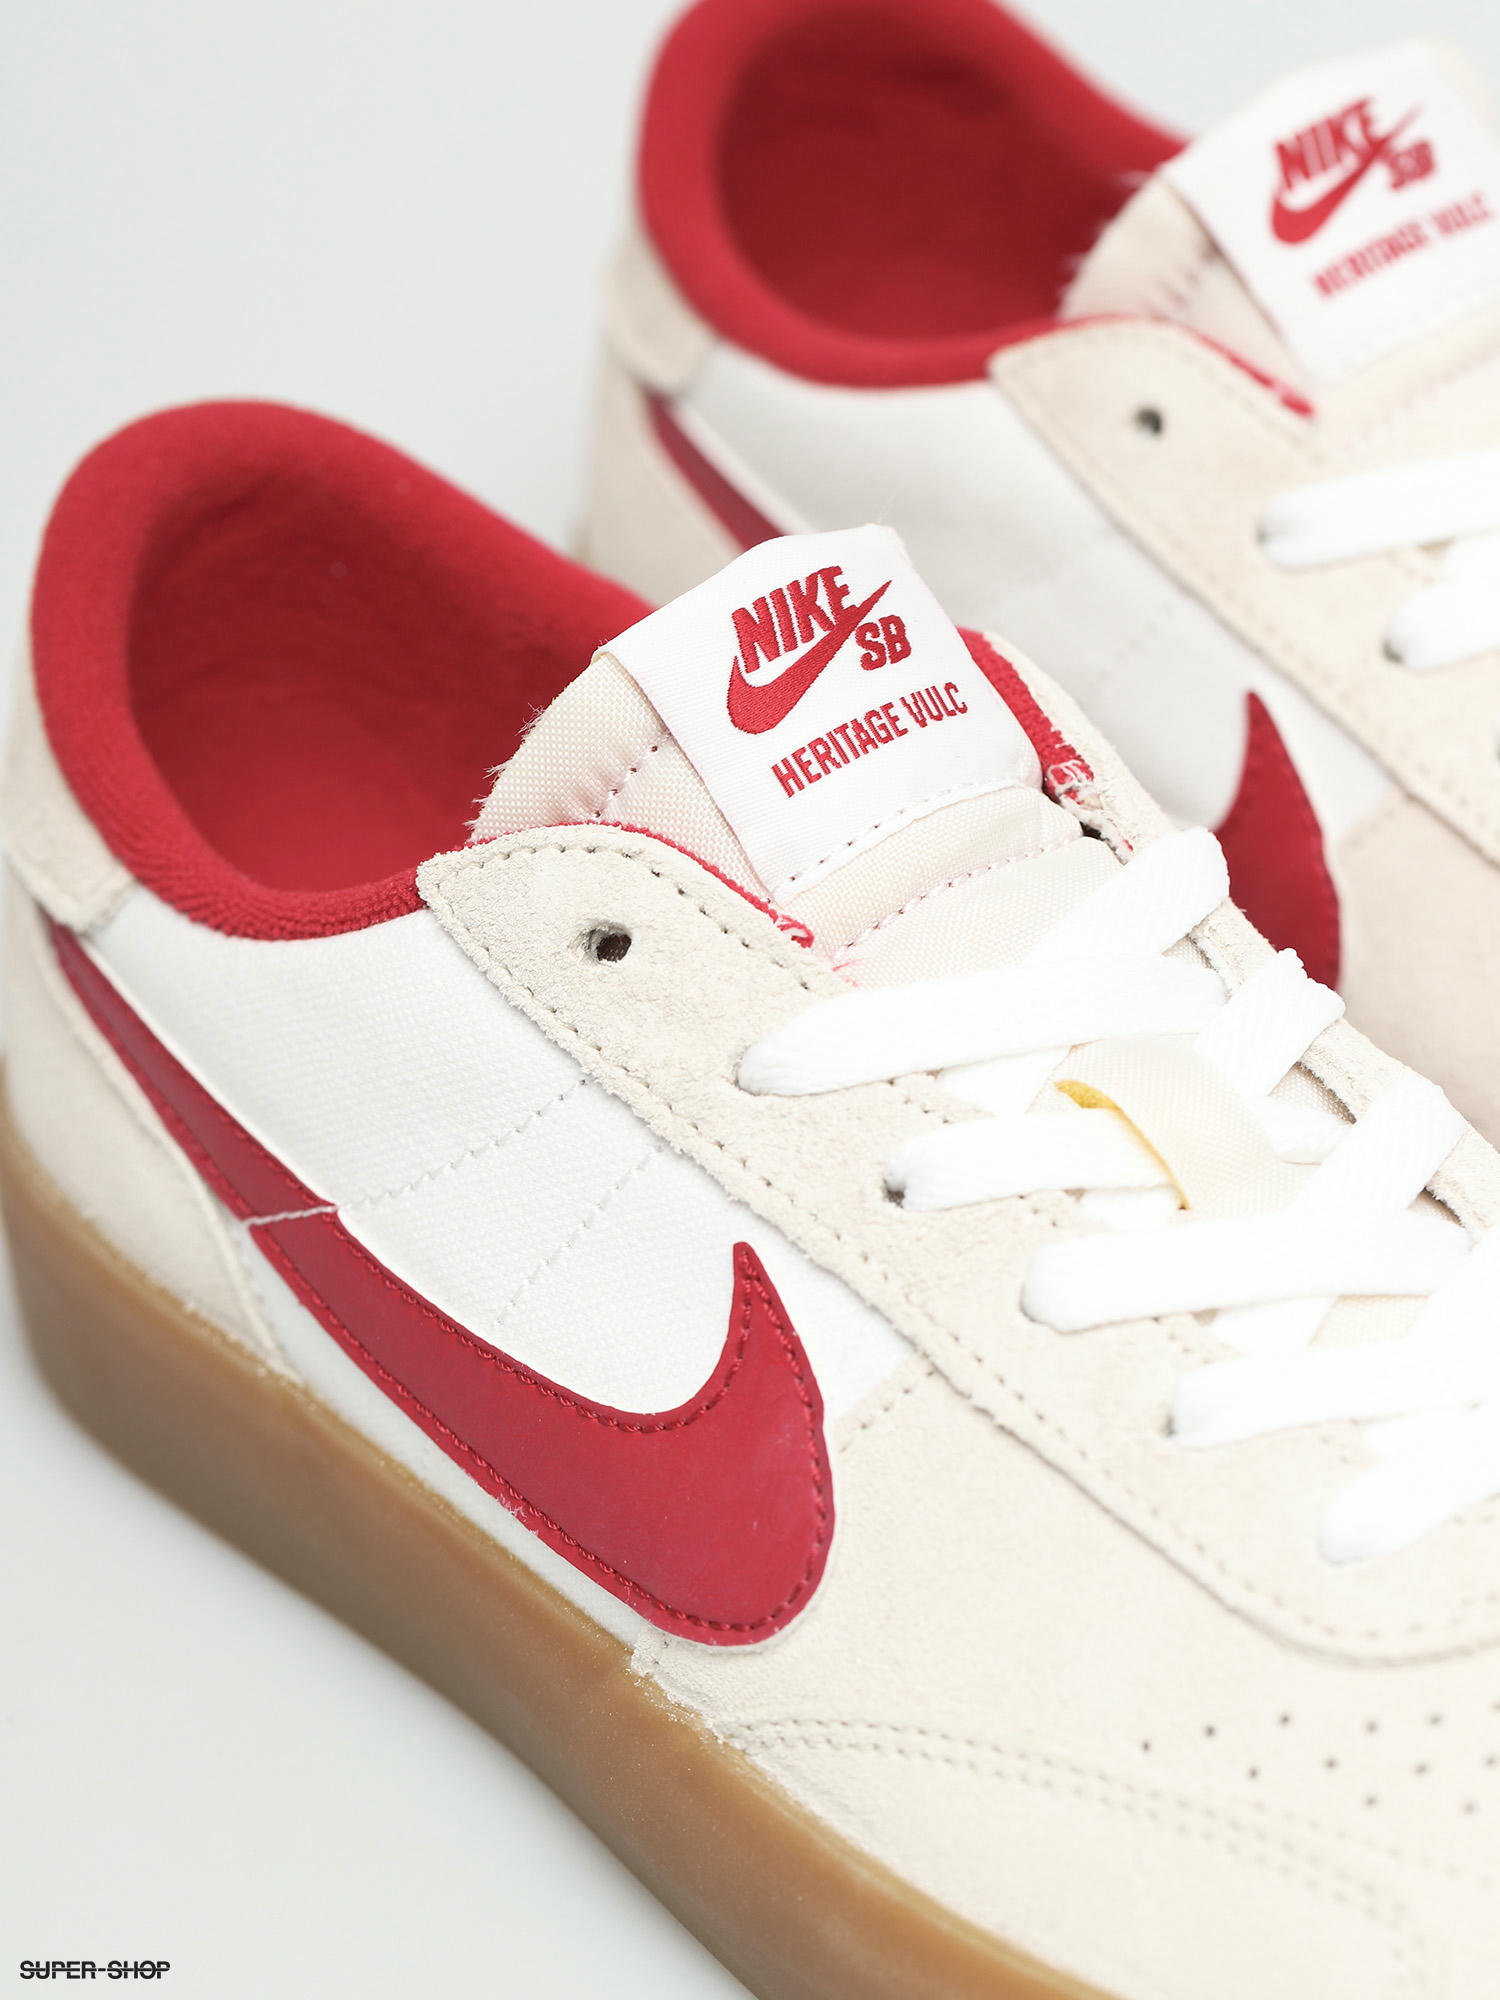 nike sb shoes red and white